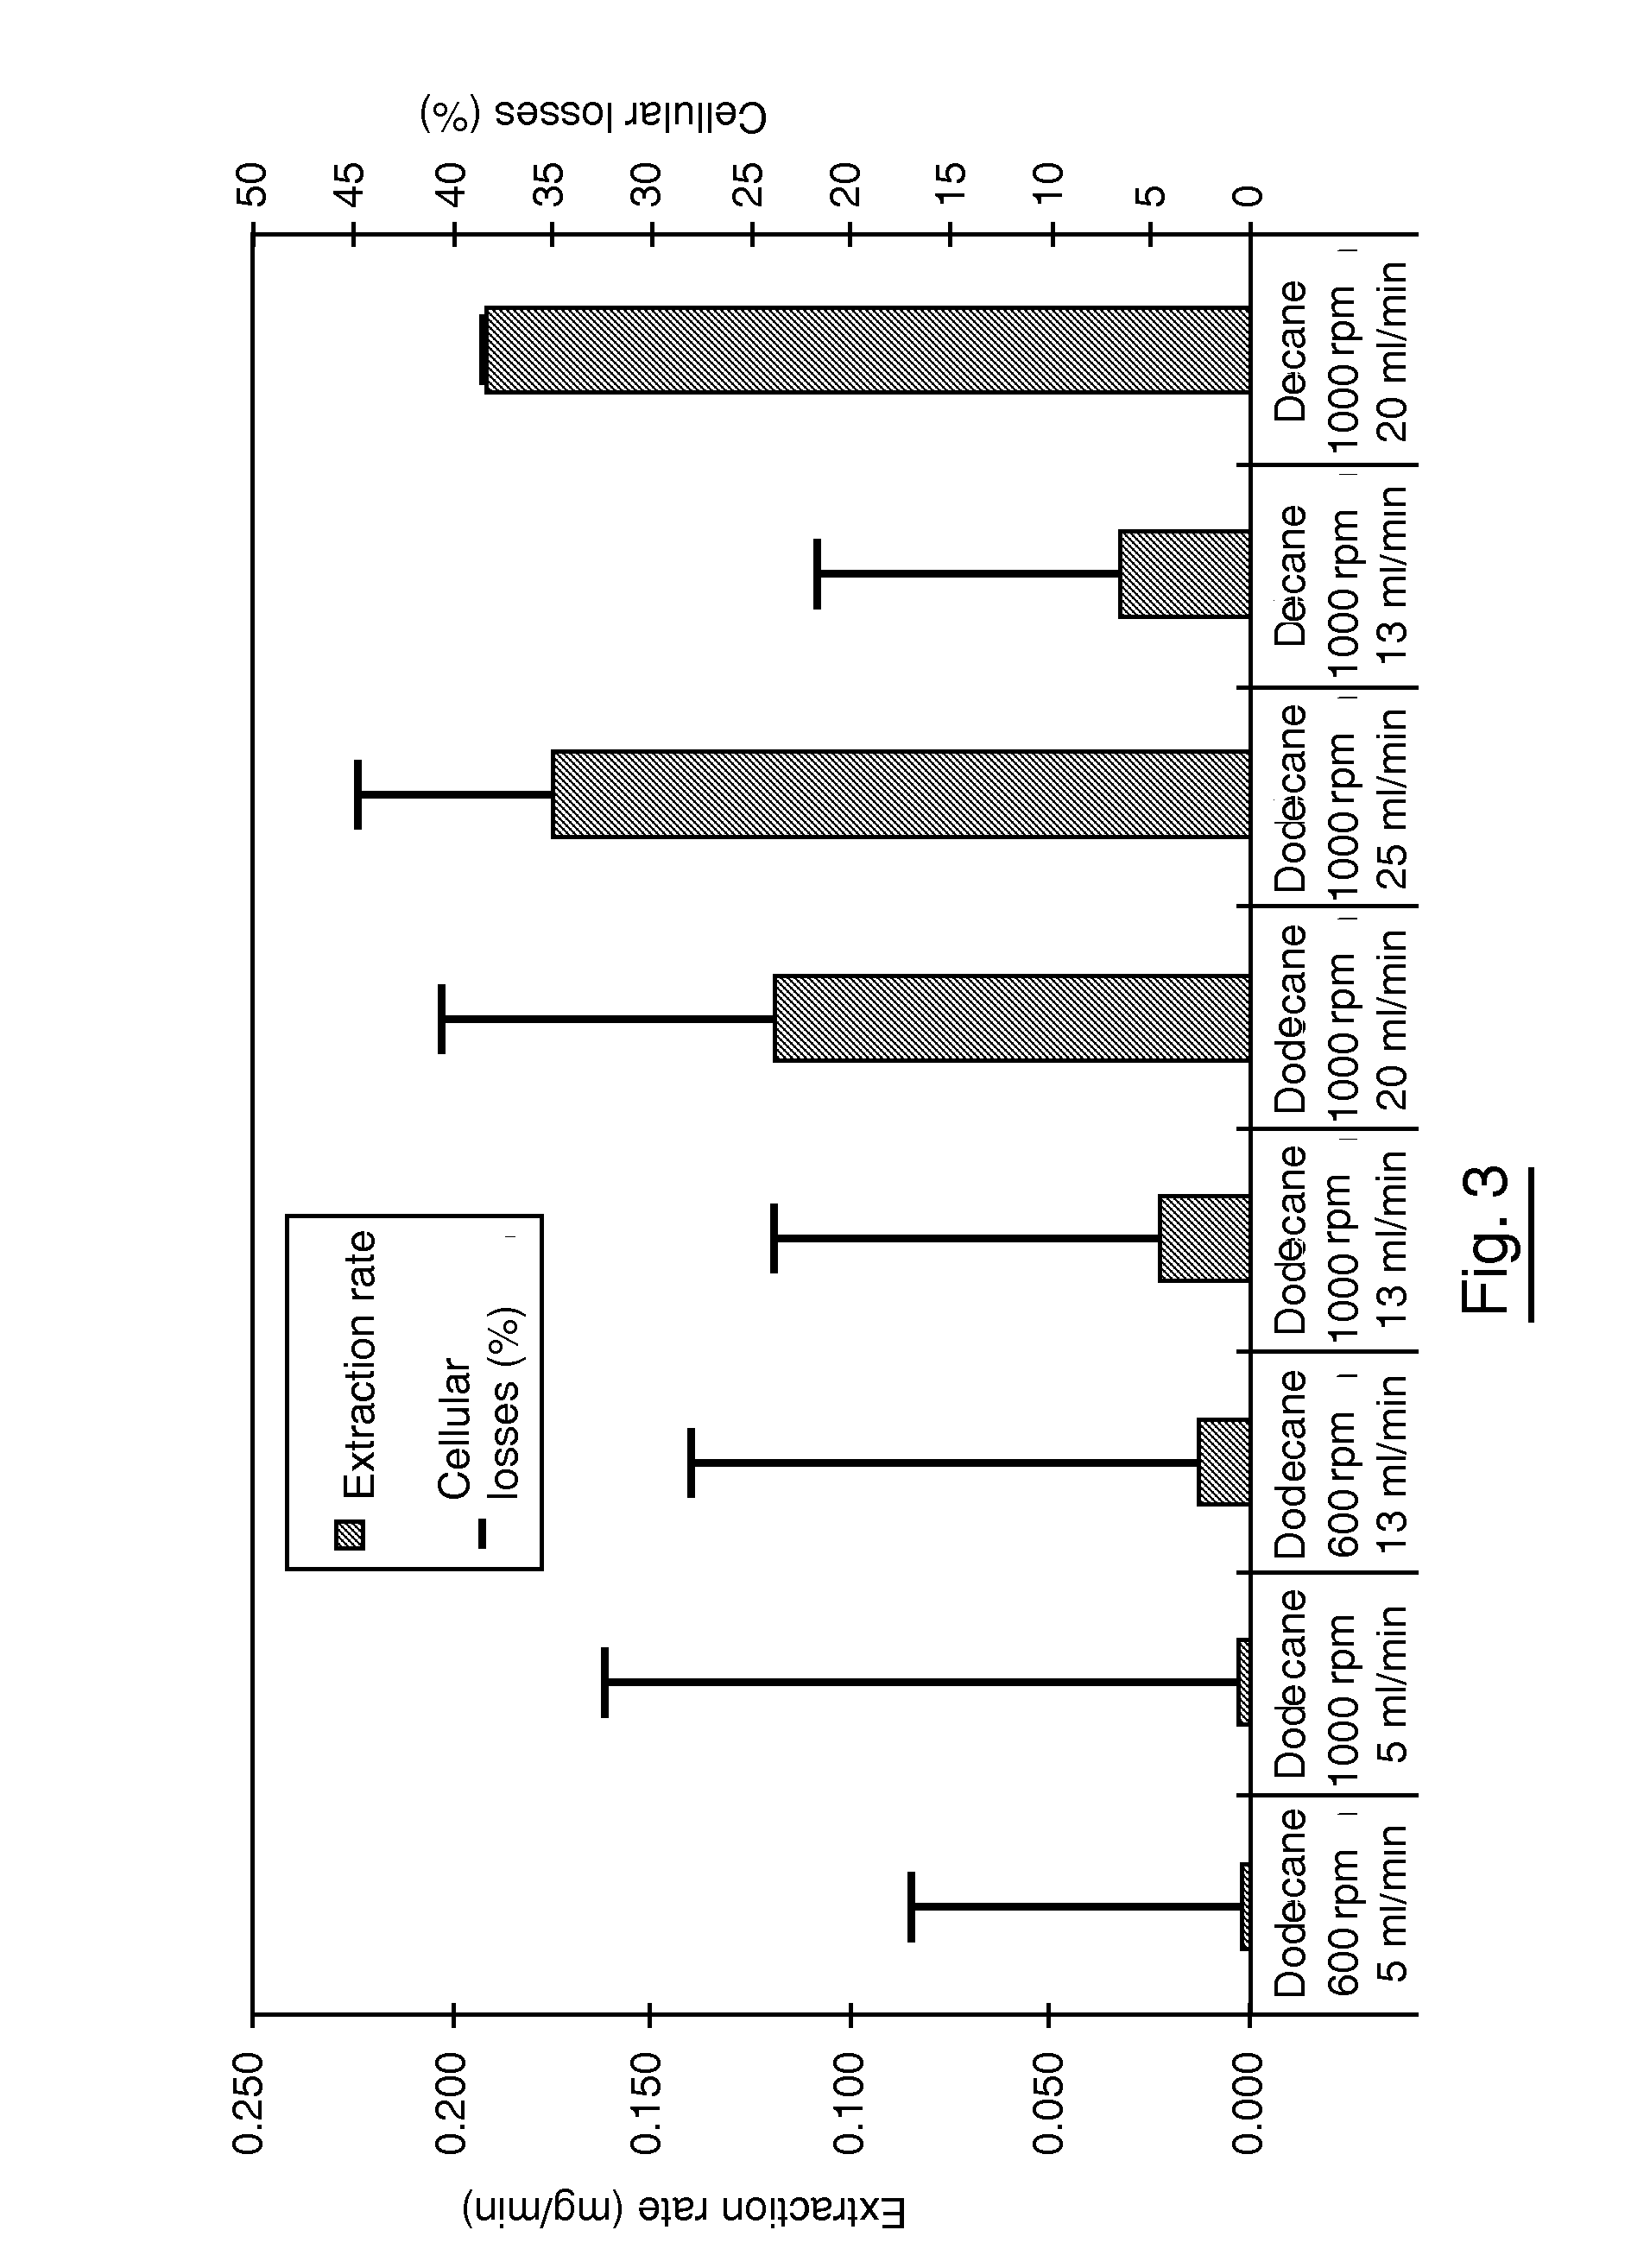 Method for the Intensive Extraction of Cellular Compounds from Micro-Organisms by Continuous Culture and Extraction, and Corresponding Device